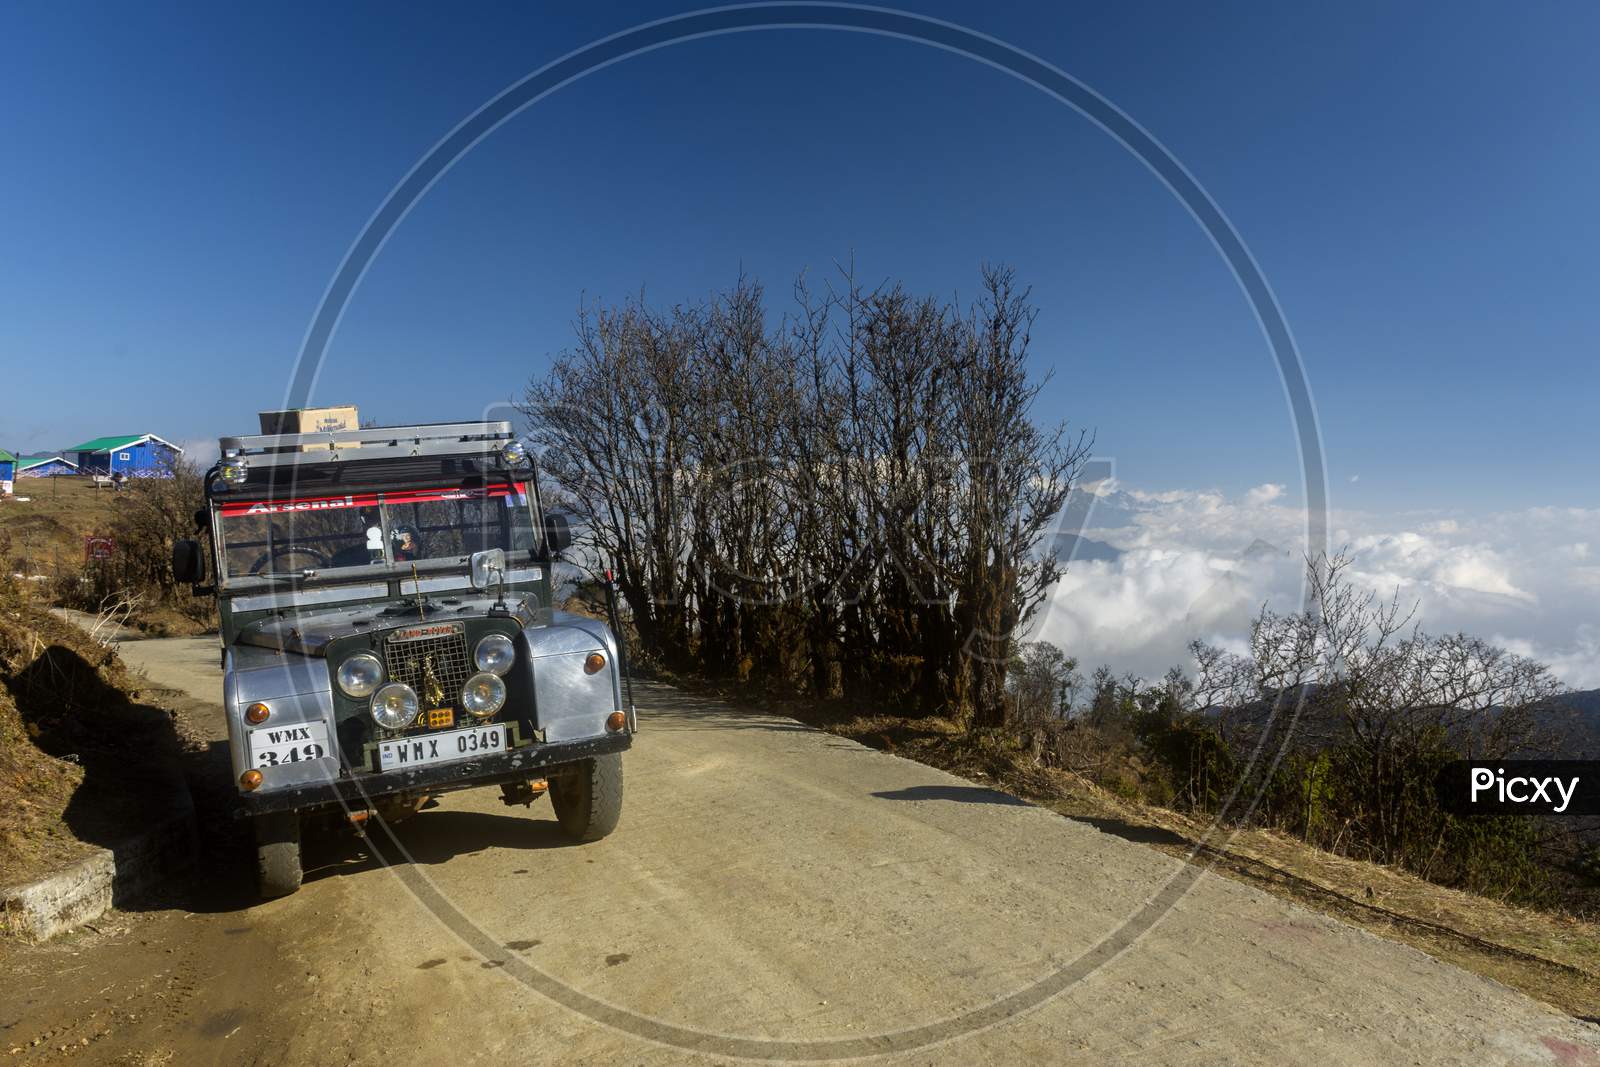 4Th March, 2020, Meghma, West Bengal, India: A Old Land Rover Car Parked Beside A Road At Tonhlu, West Bengal, India.